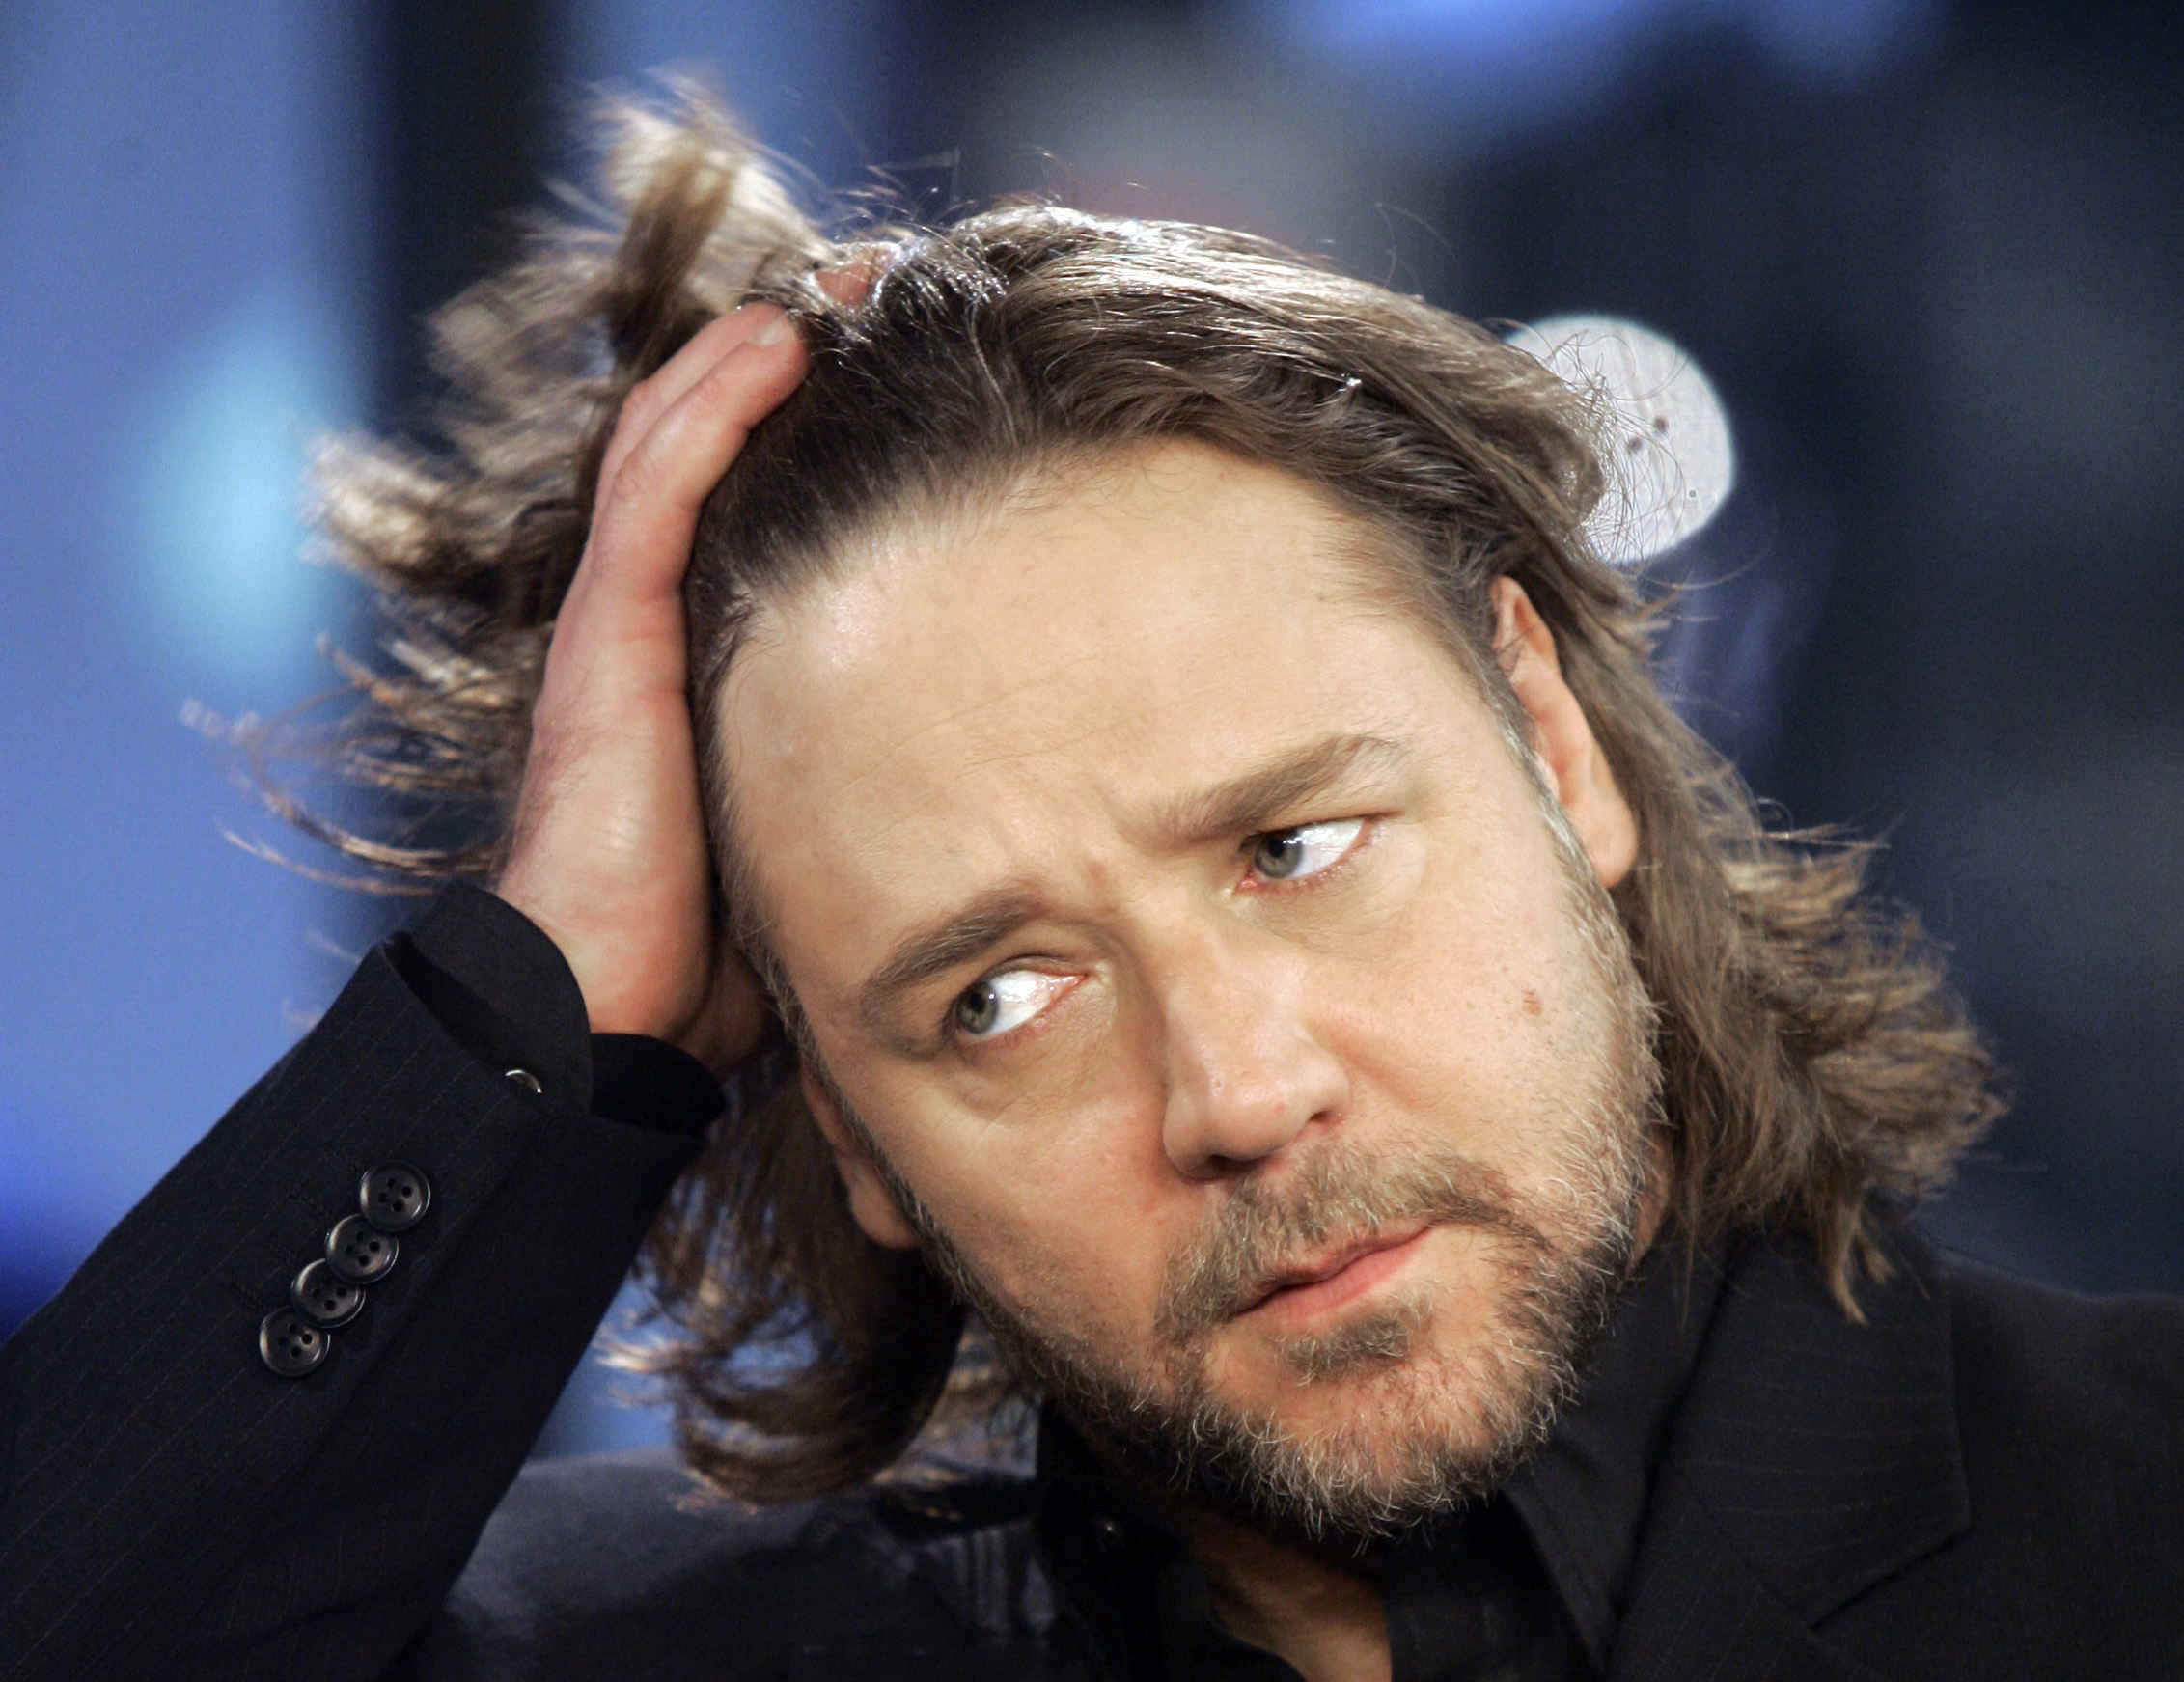 http://images2.fanpop.com/images/photos/6300000/Russell-russell-crowe-6305374-2263-1743.jpg